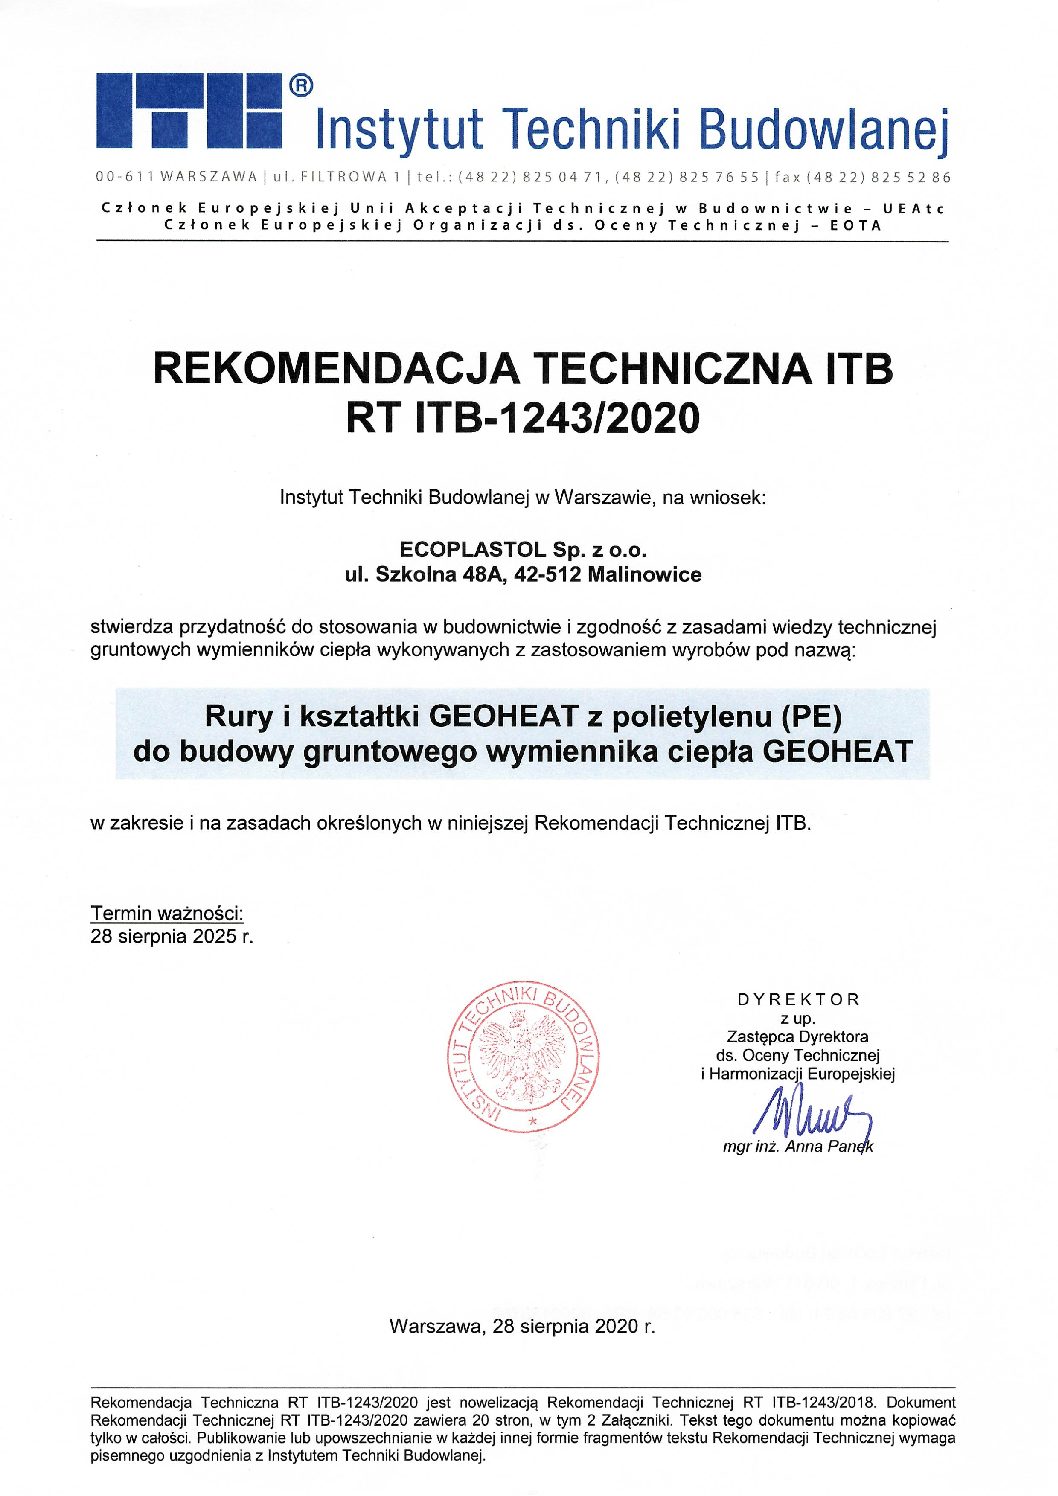 ITB technical recommendation